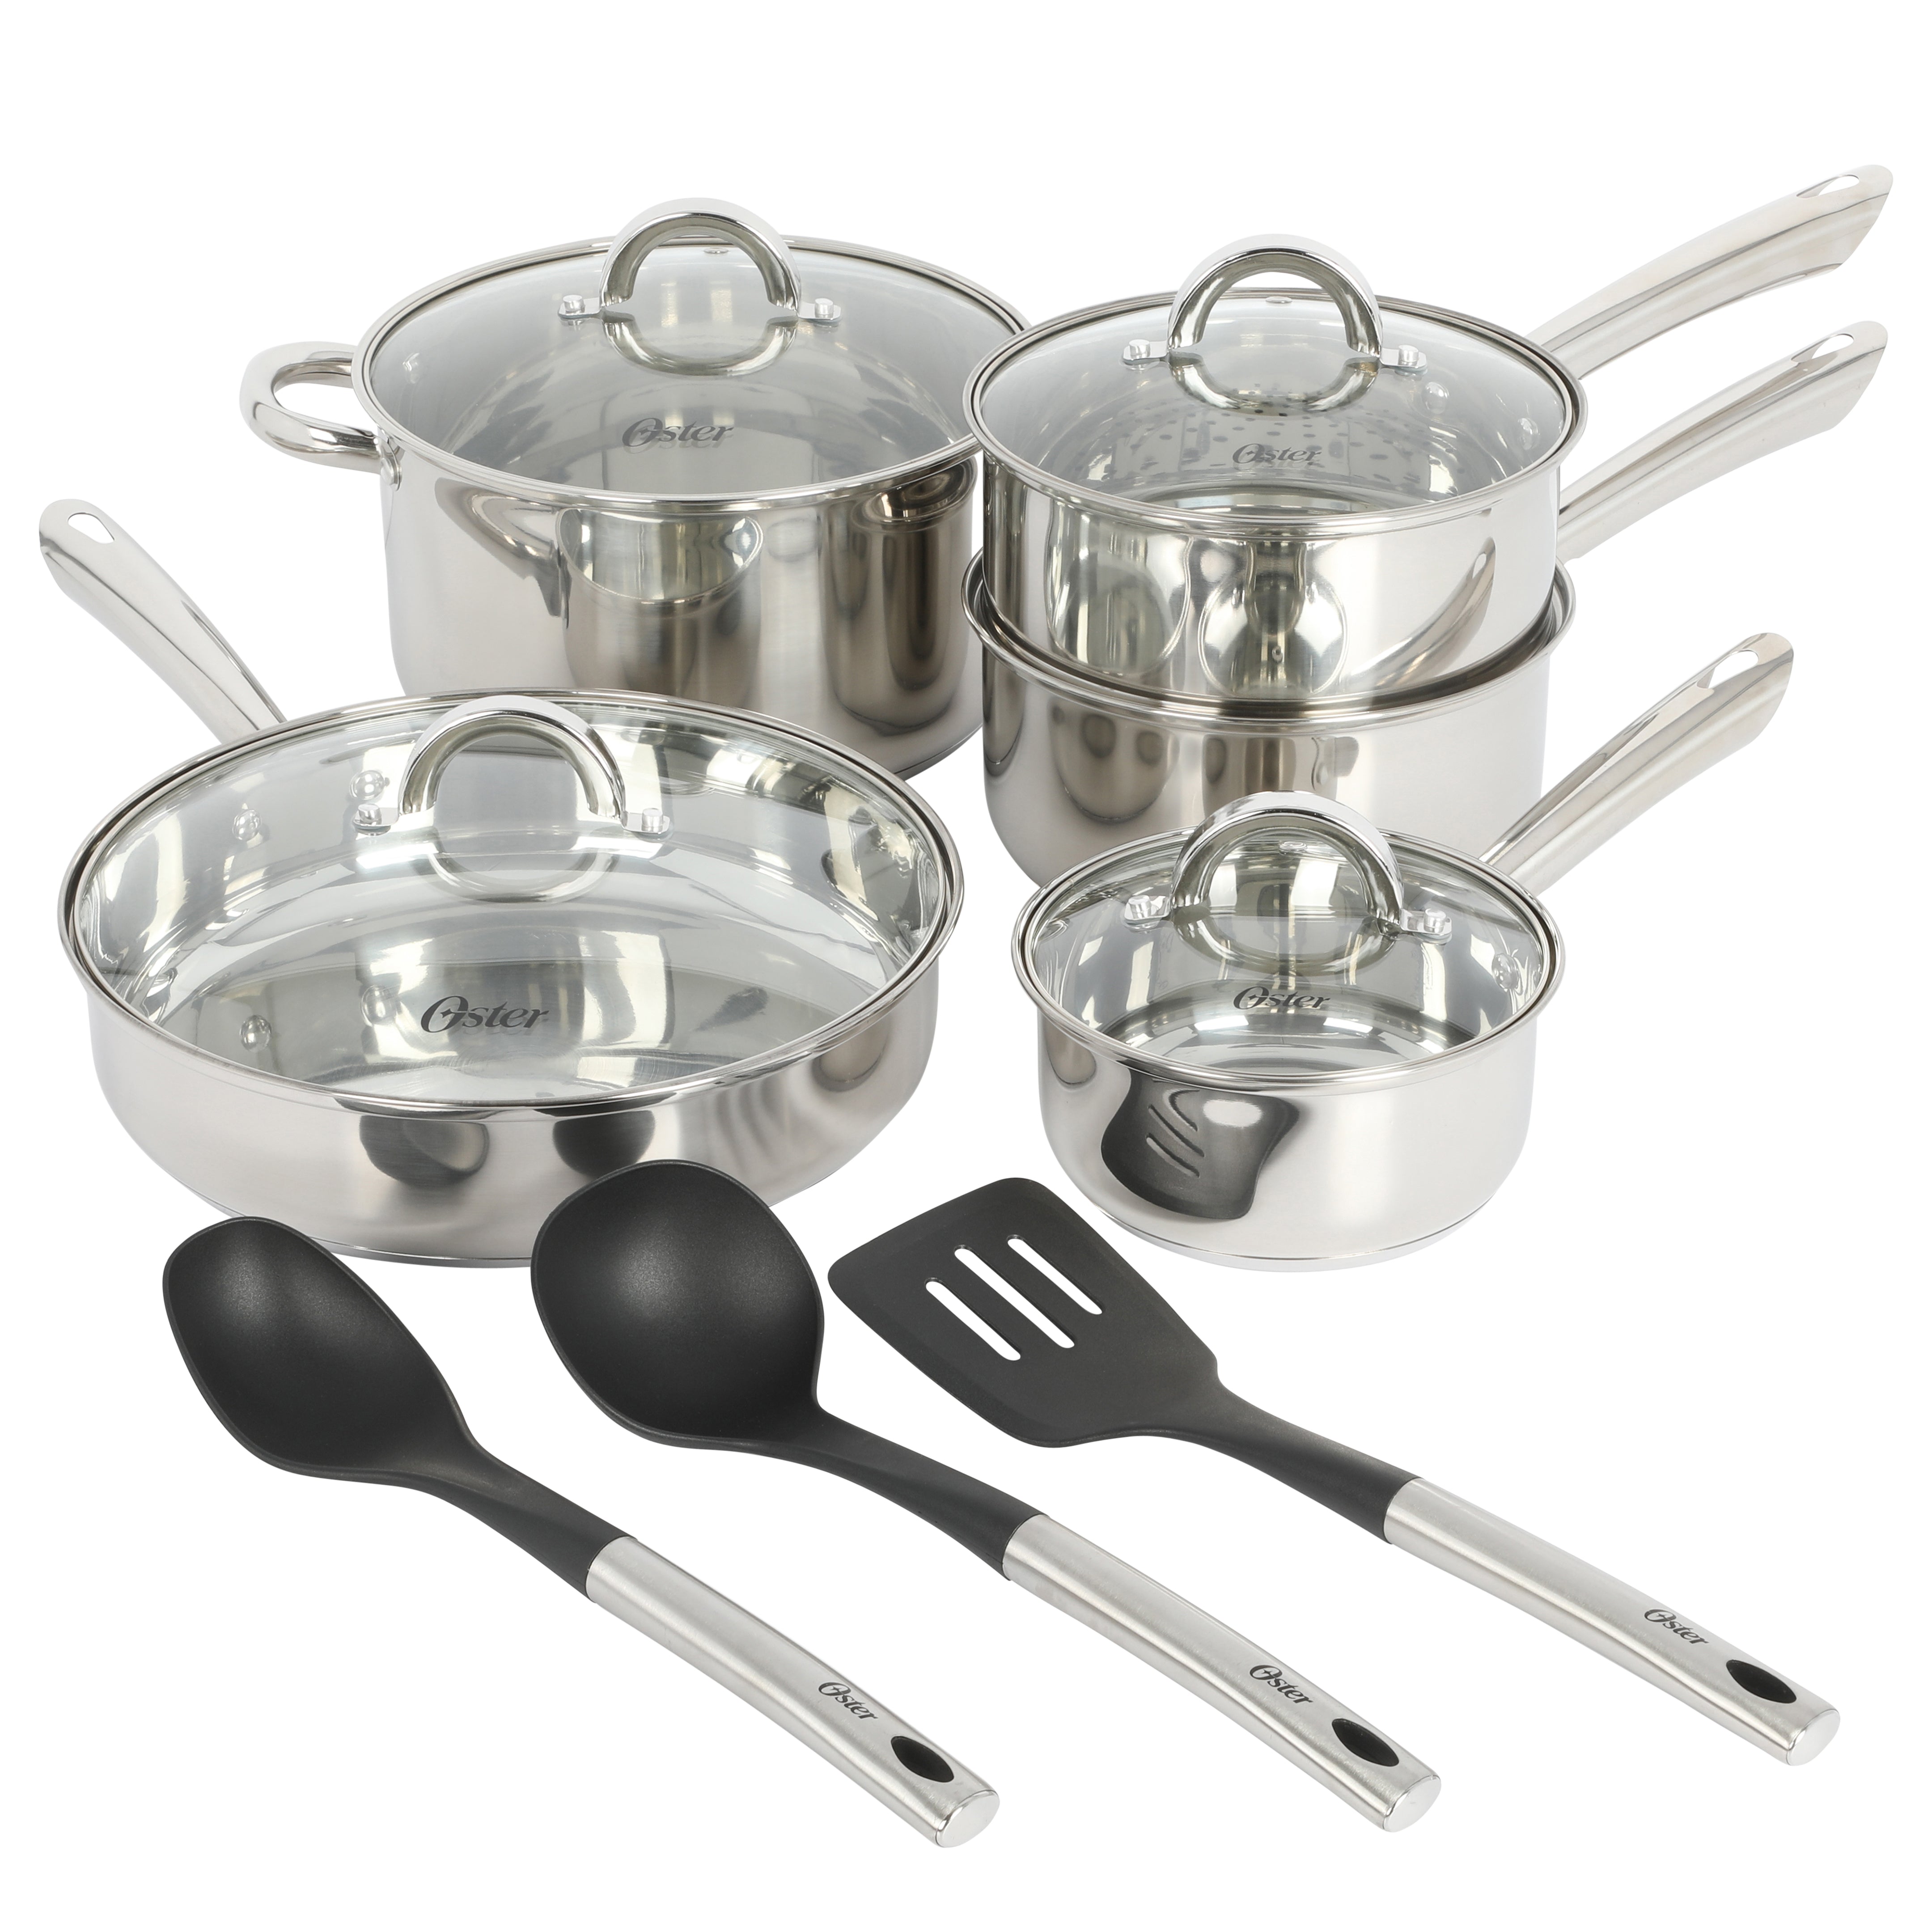 Oster Sangerfield 12-Piece Stainless Steel Cookware Set w/ Kitchen Tools